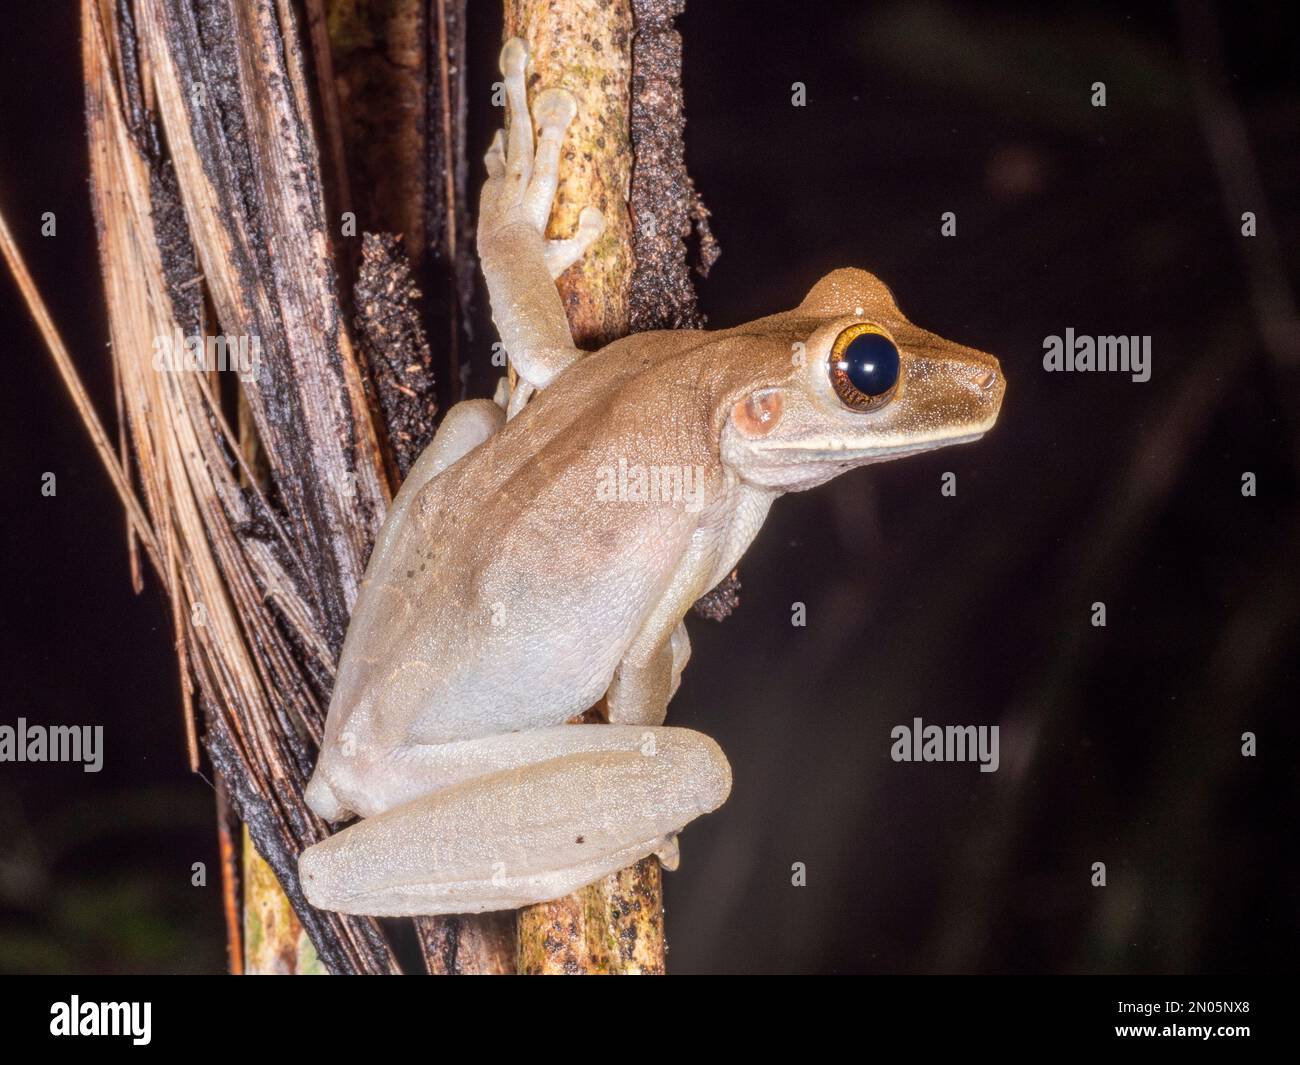 Flat broad-headed tree frog (Osteocephalus planiceps) on a branch in the rainforest in the Ecuadorian Amazon Stock Photo